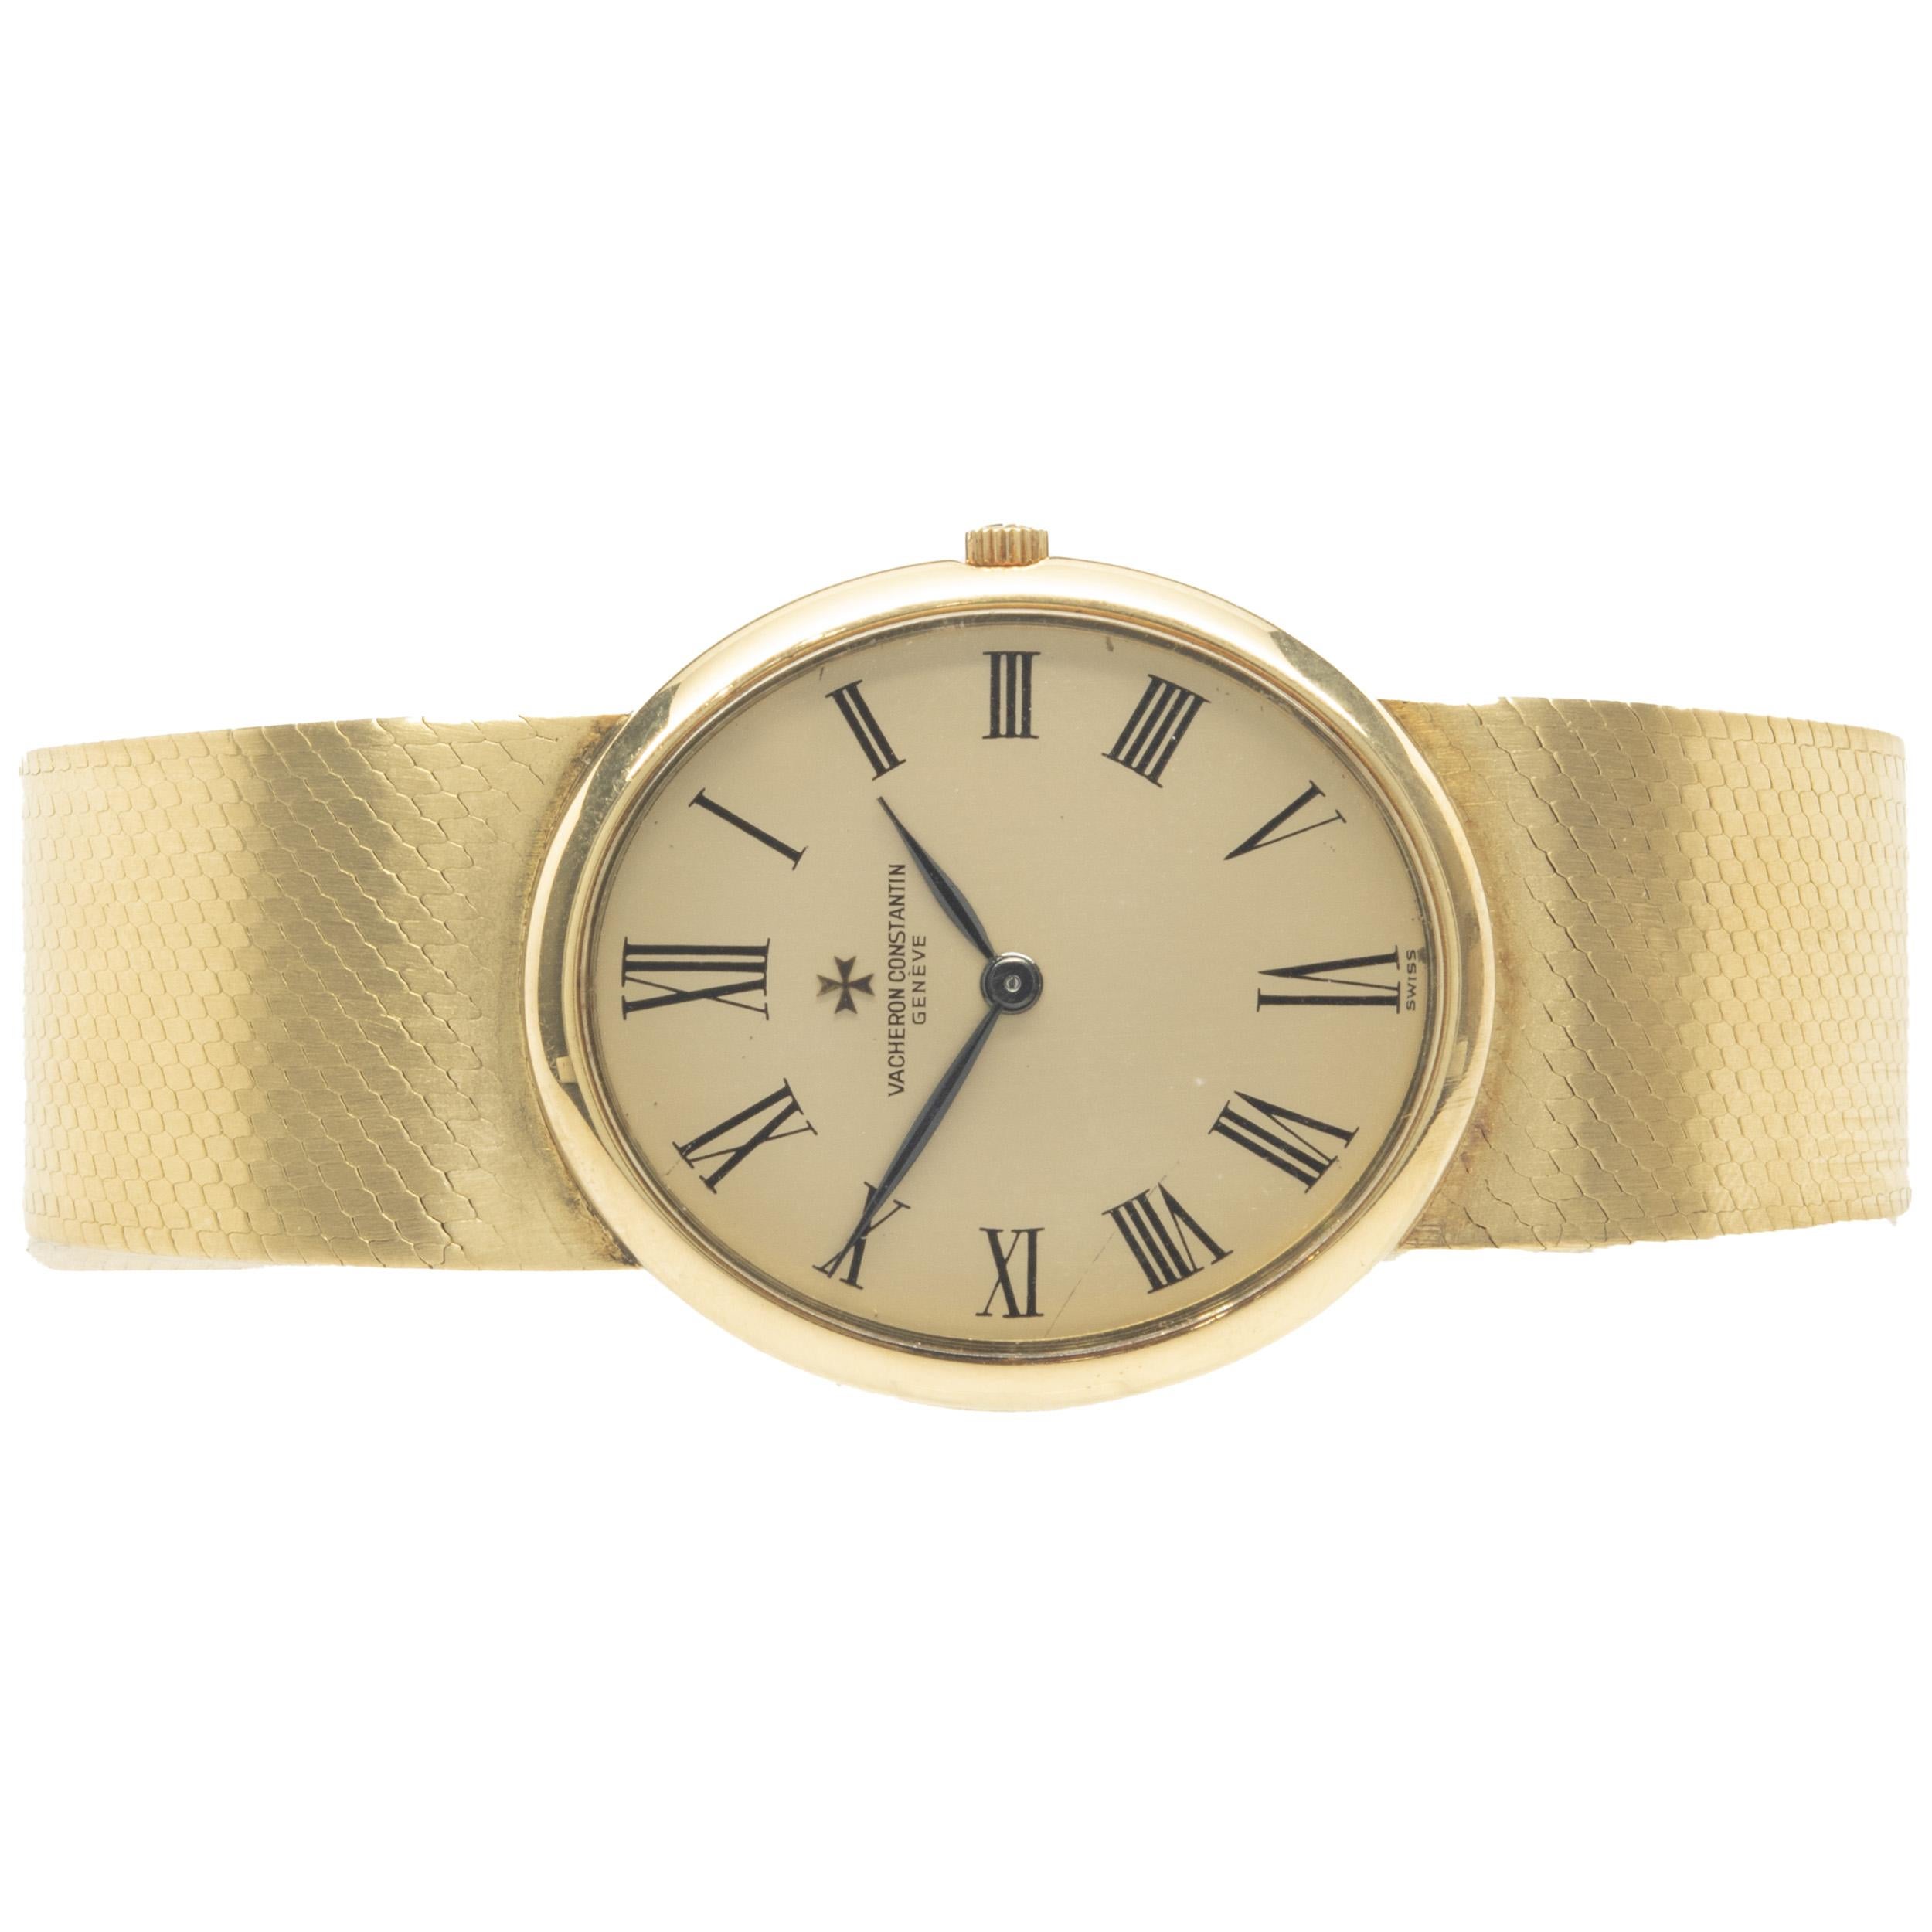 Movement: manual 
Function: hours, minutes, seconds
Case: oval 32mm 18k yellow gold case with smooth bezel
Dial: champagne roman
Band:  18K yellow gold mesh bracelet, integrated clasp
Serial #: 469XXX
Reference #: 720188

Complete with original box